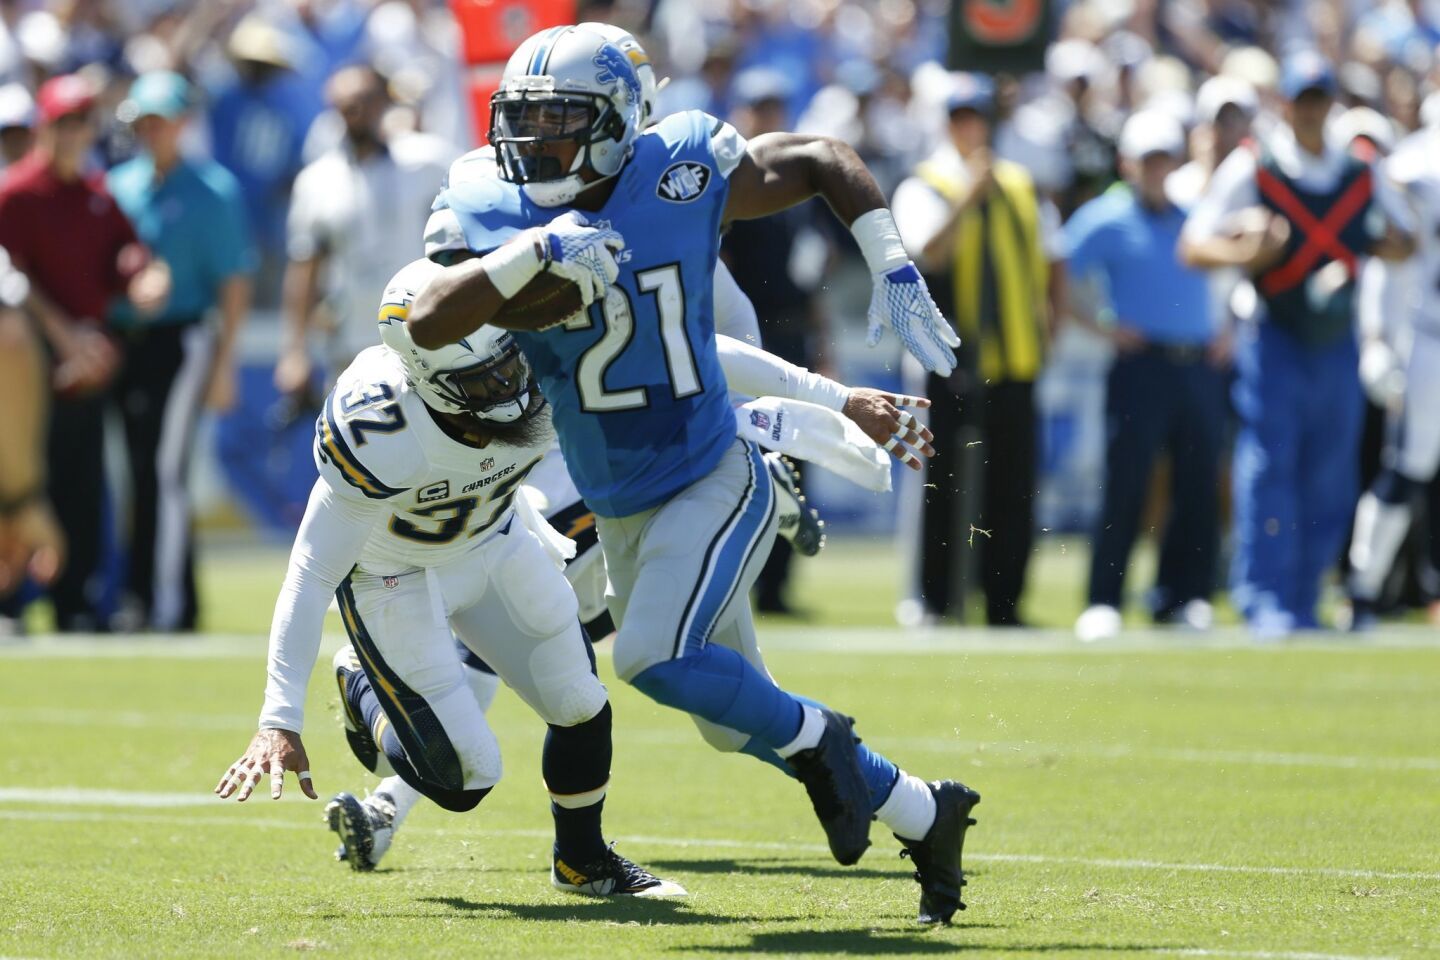 Detroit Lions running back Ameer Abdullah scores a touchdown against the San Diego Chargers during the first half of an NFL football game Sunday, Sept. 13, 2015, in San Diego. (AP Photo/Alex Gallardo)